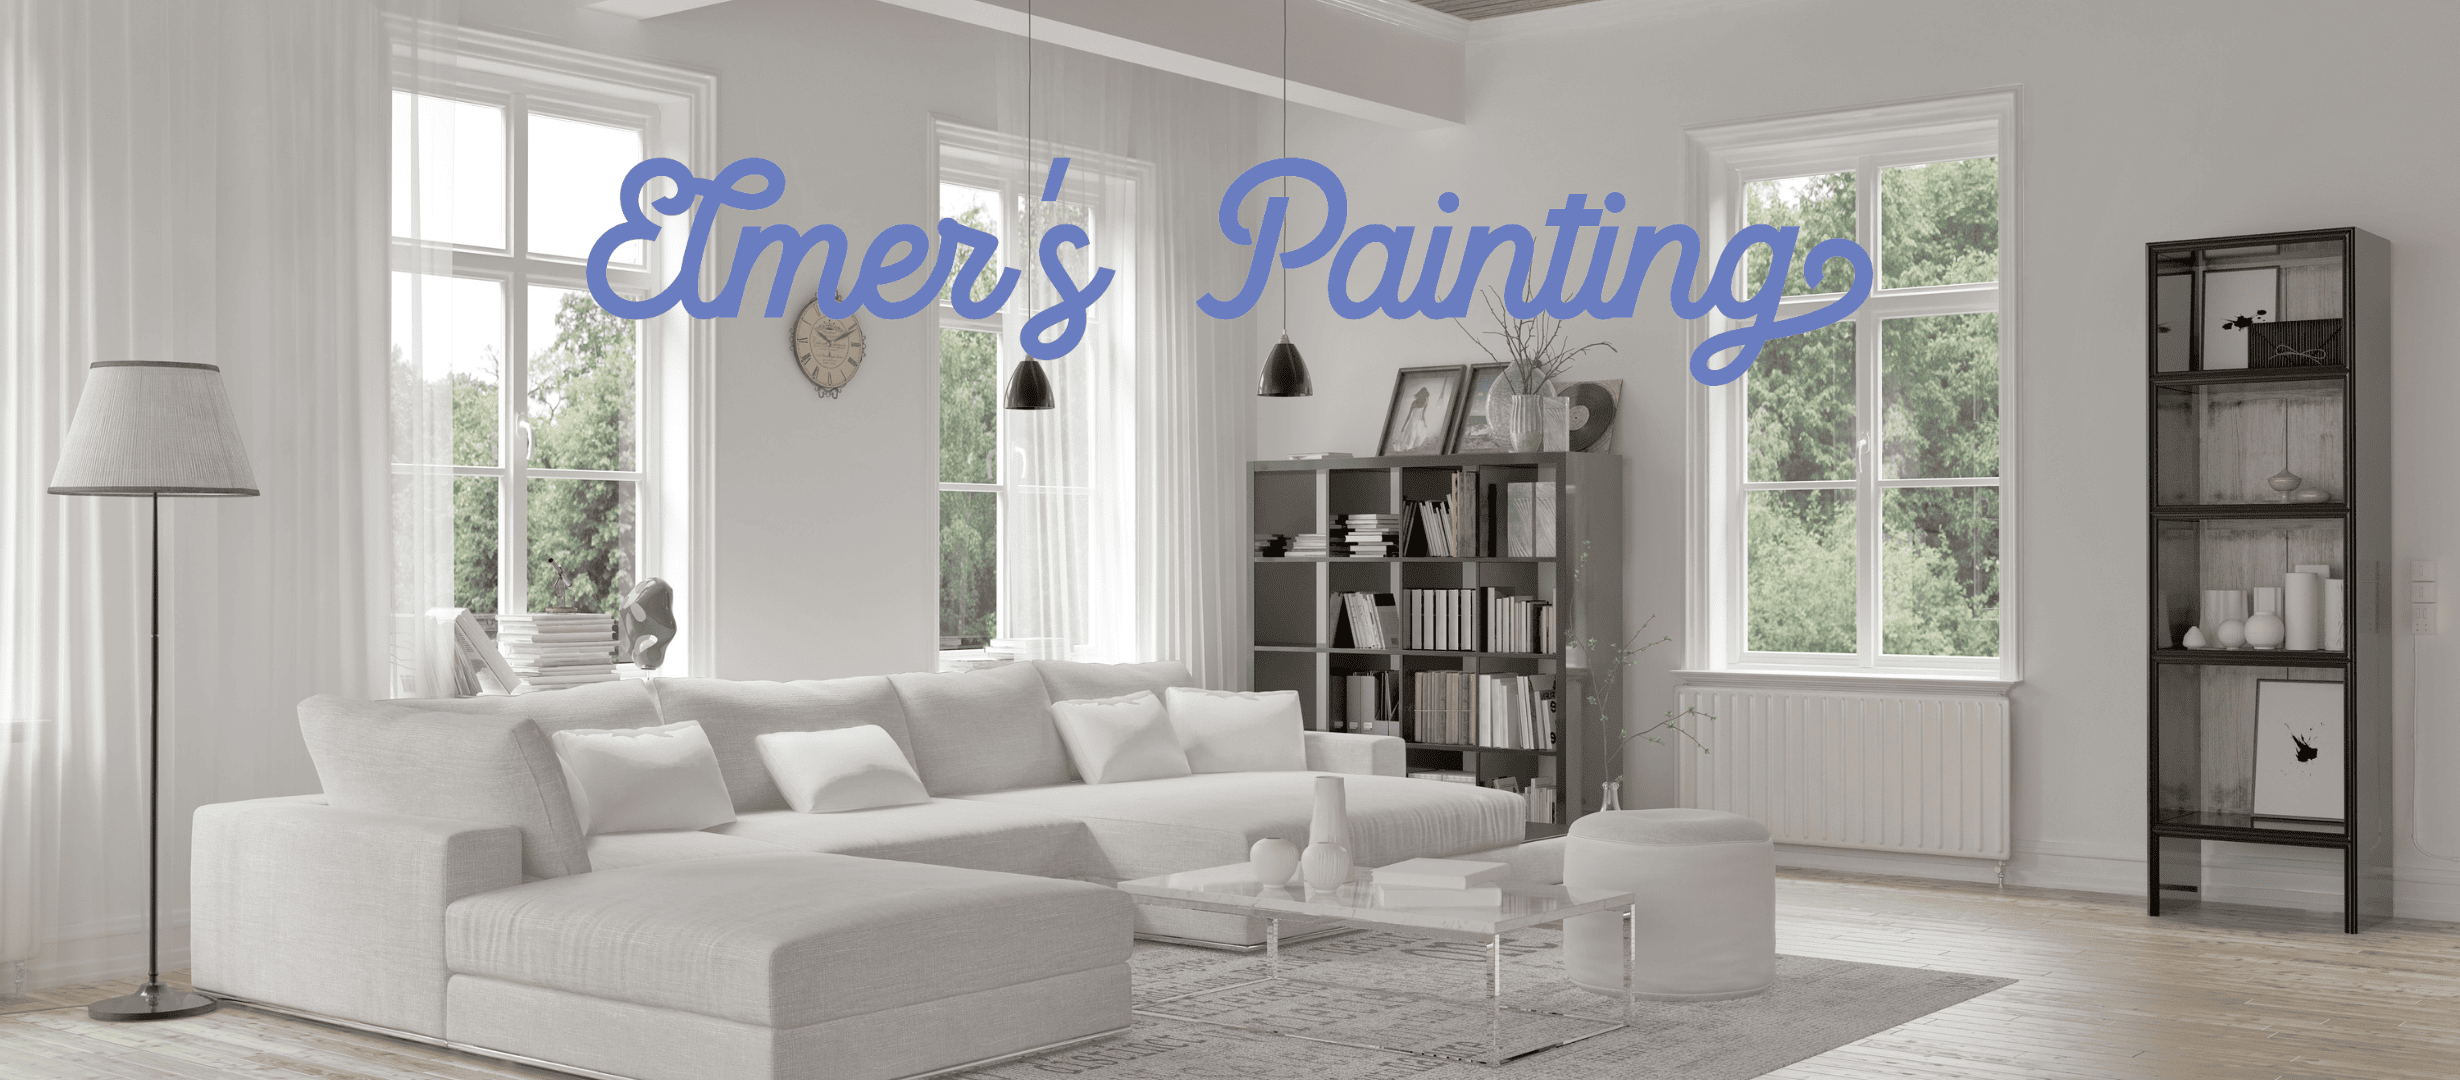 Elmer’s Painting, INC - Valley Cottage, NY, US, blue house paint